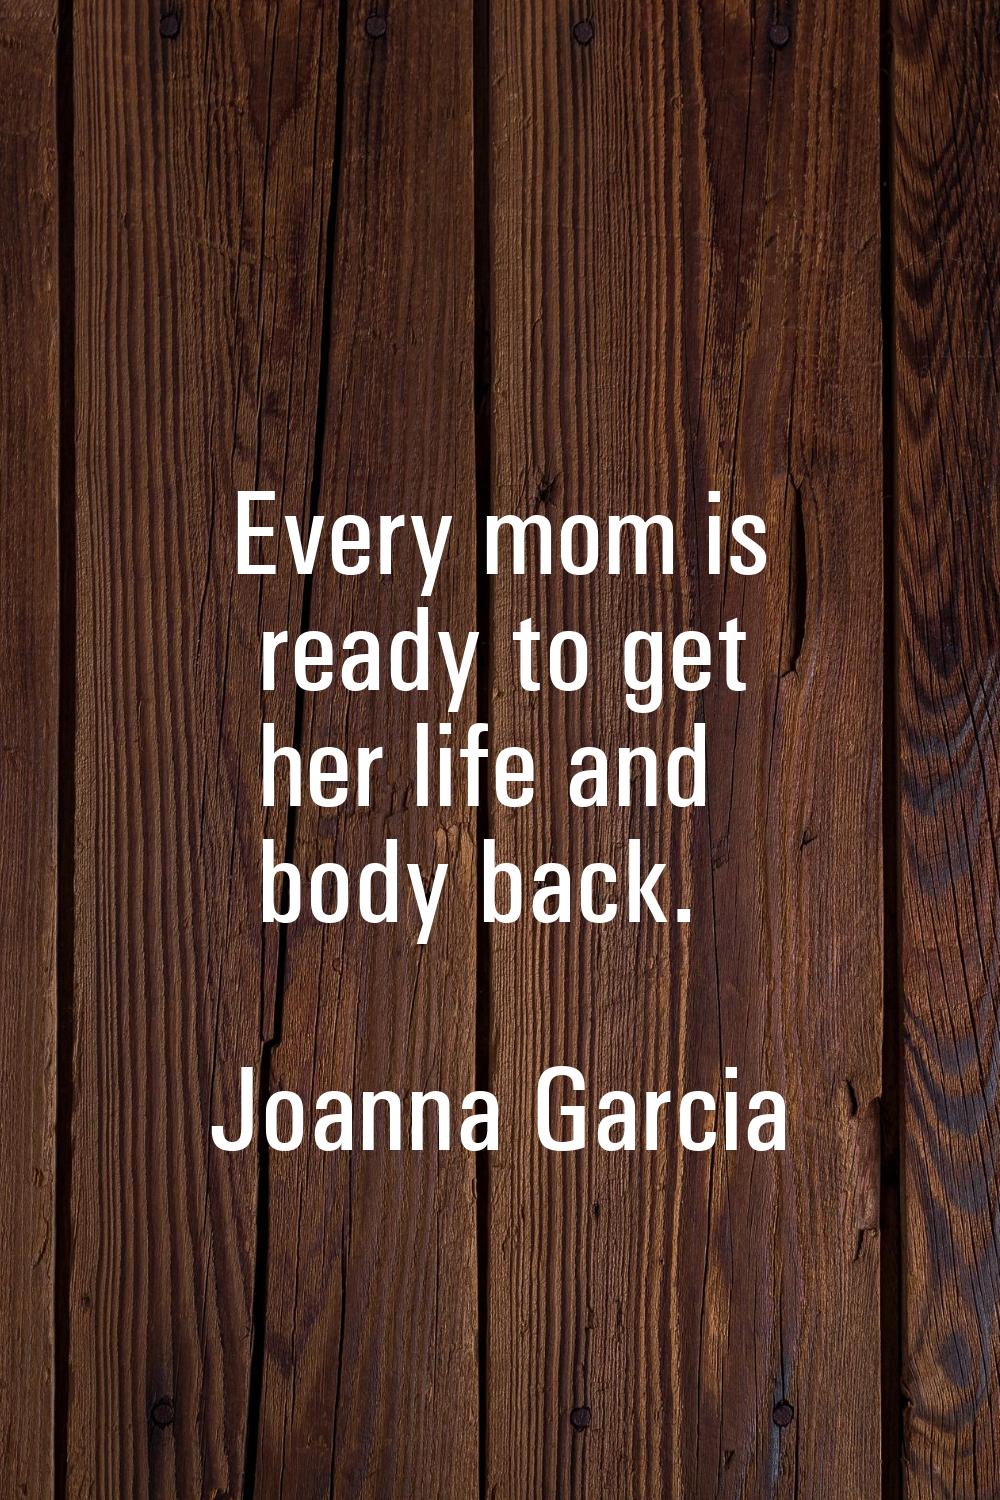 Every mom is ready to get her life and body back.